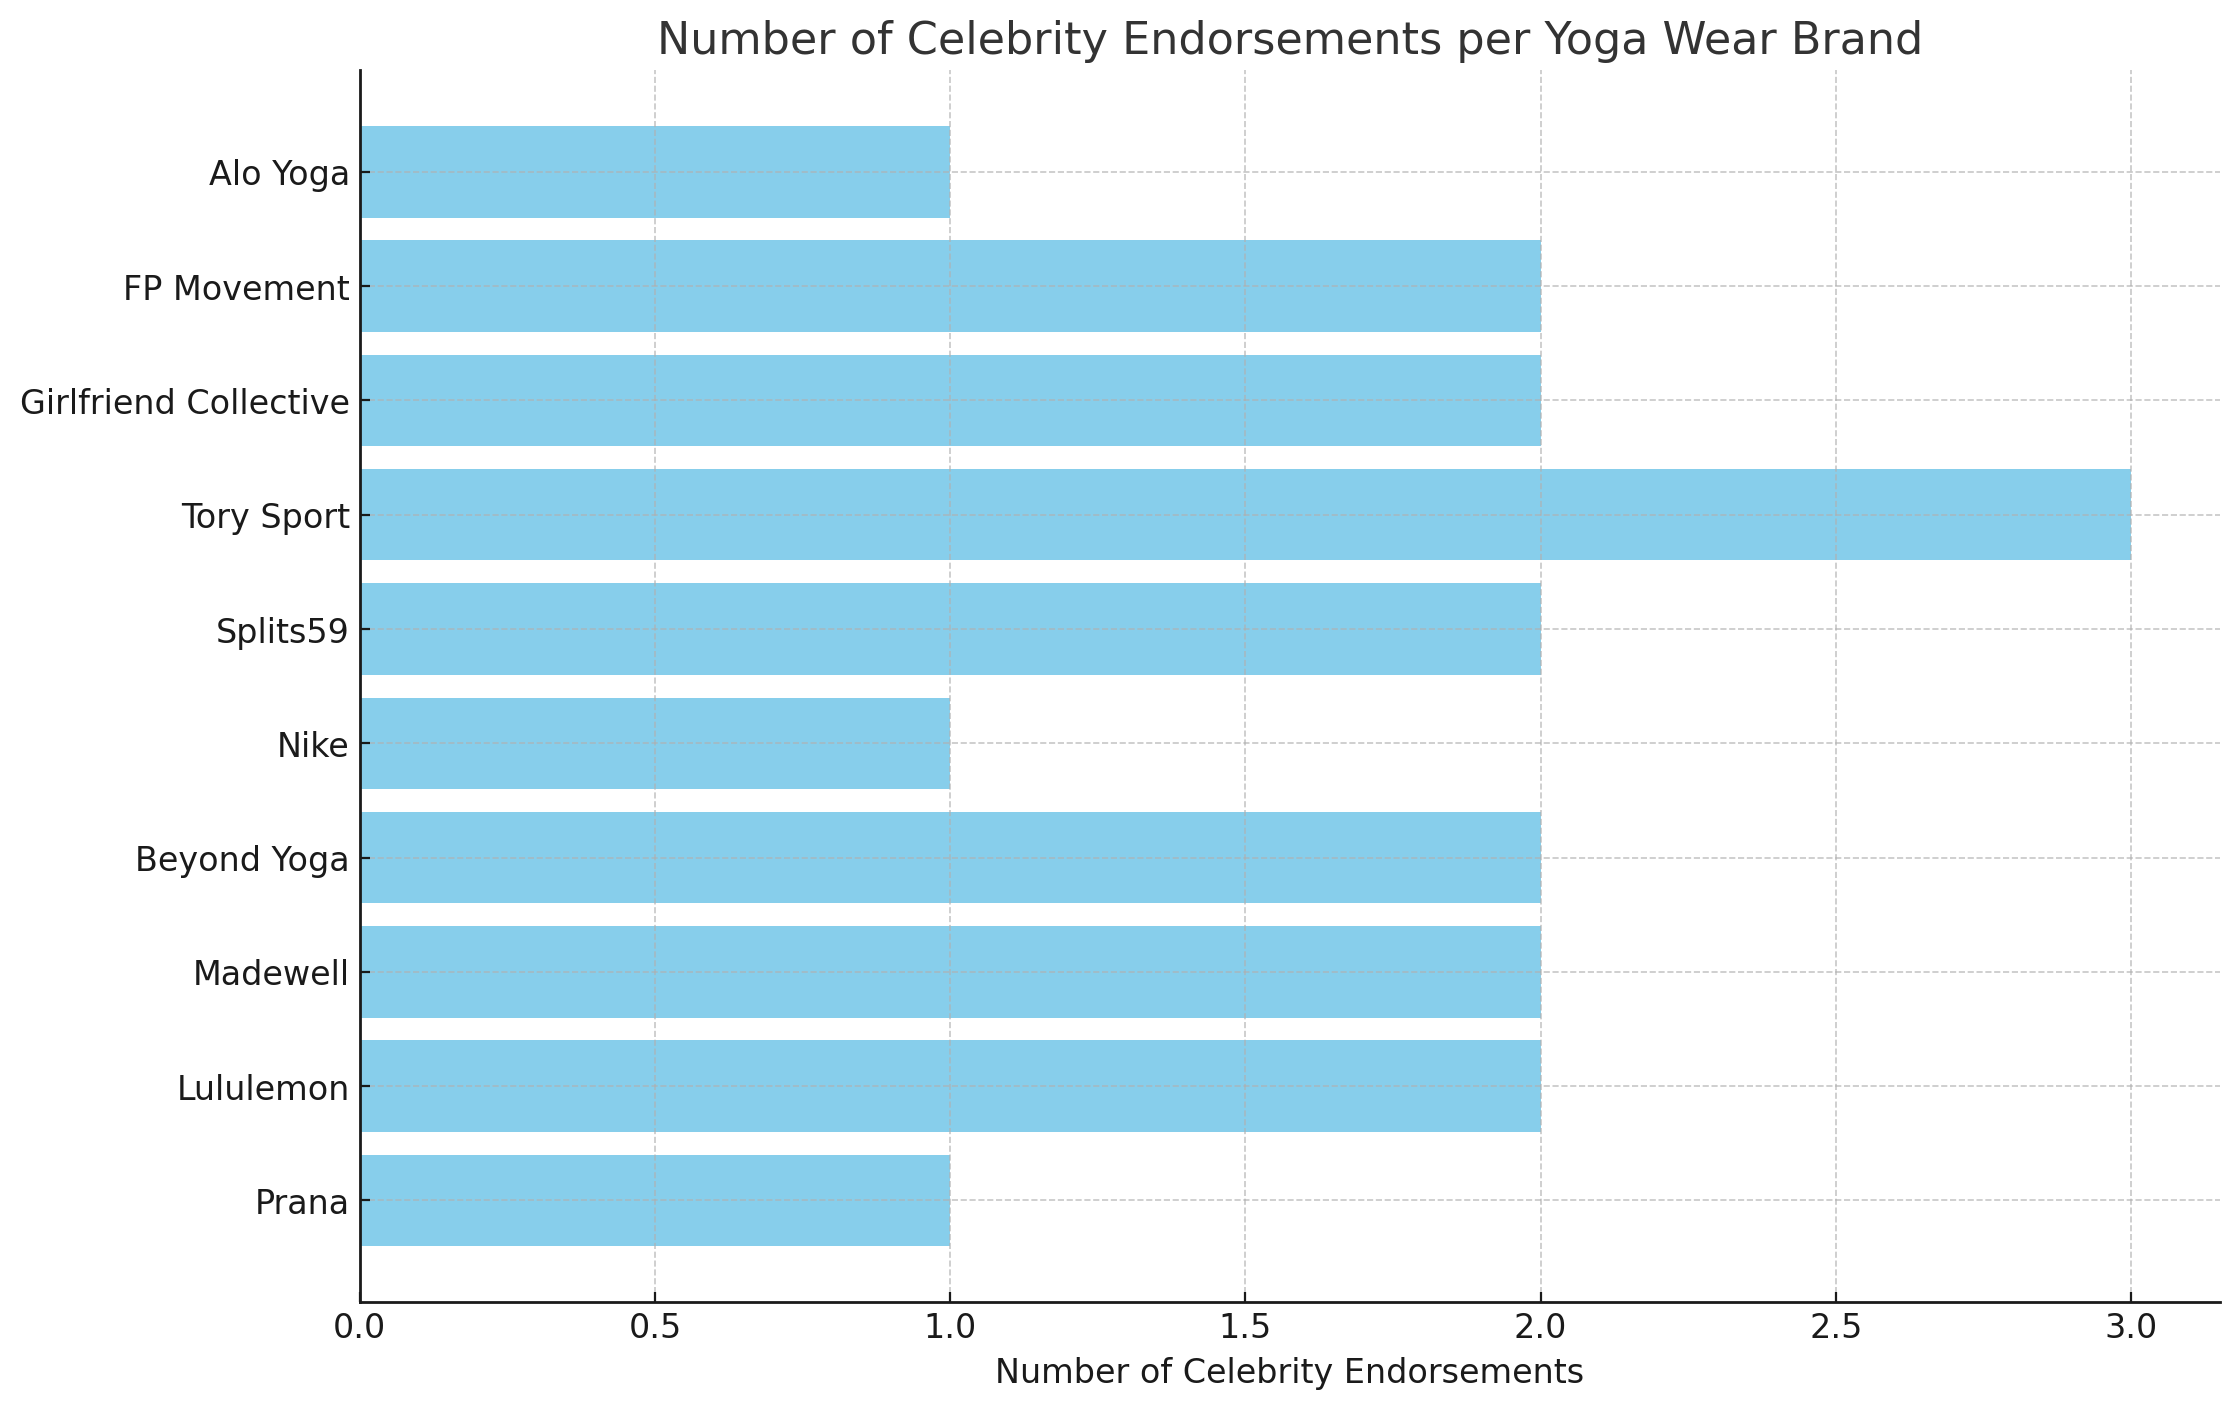 number of celebrity endorsements for each yoga wear brand